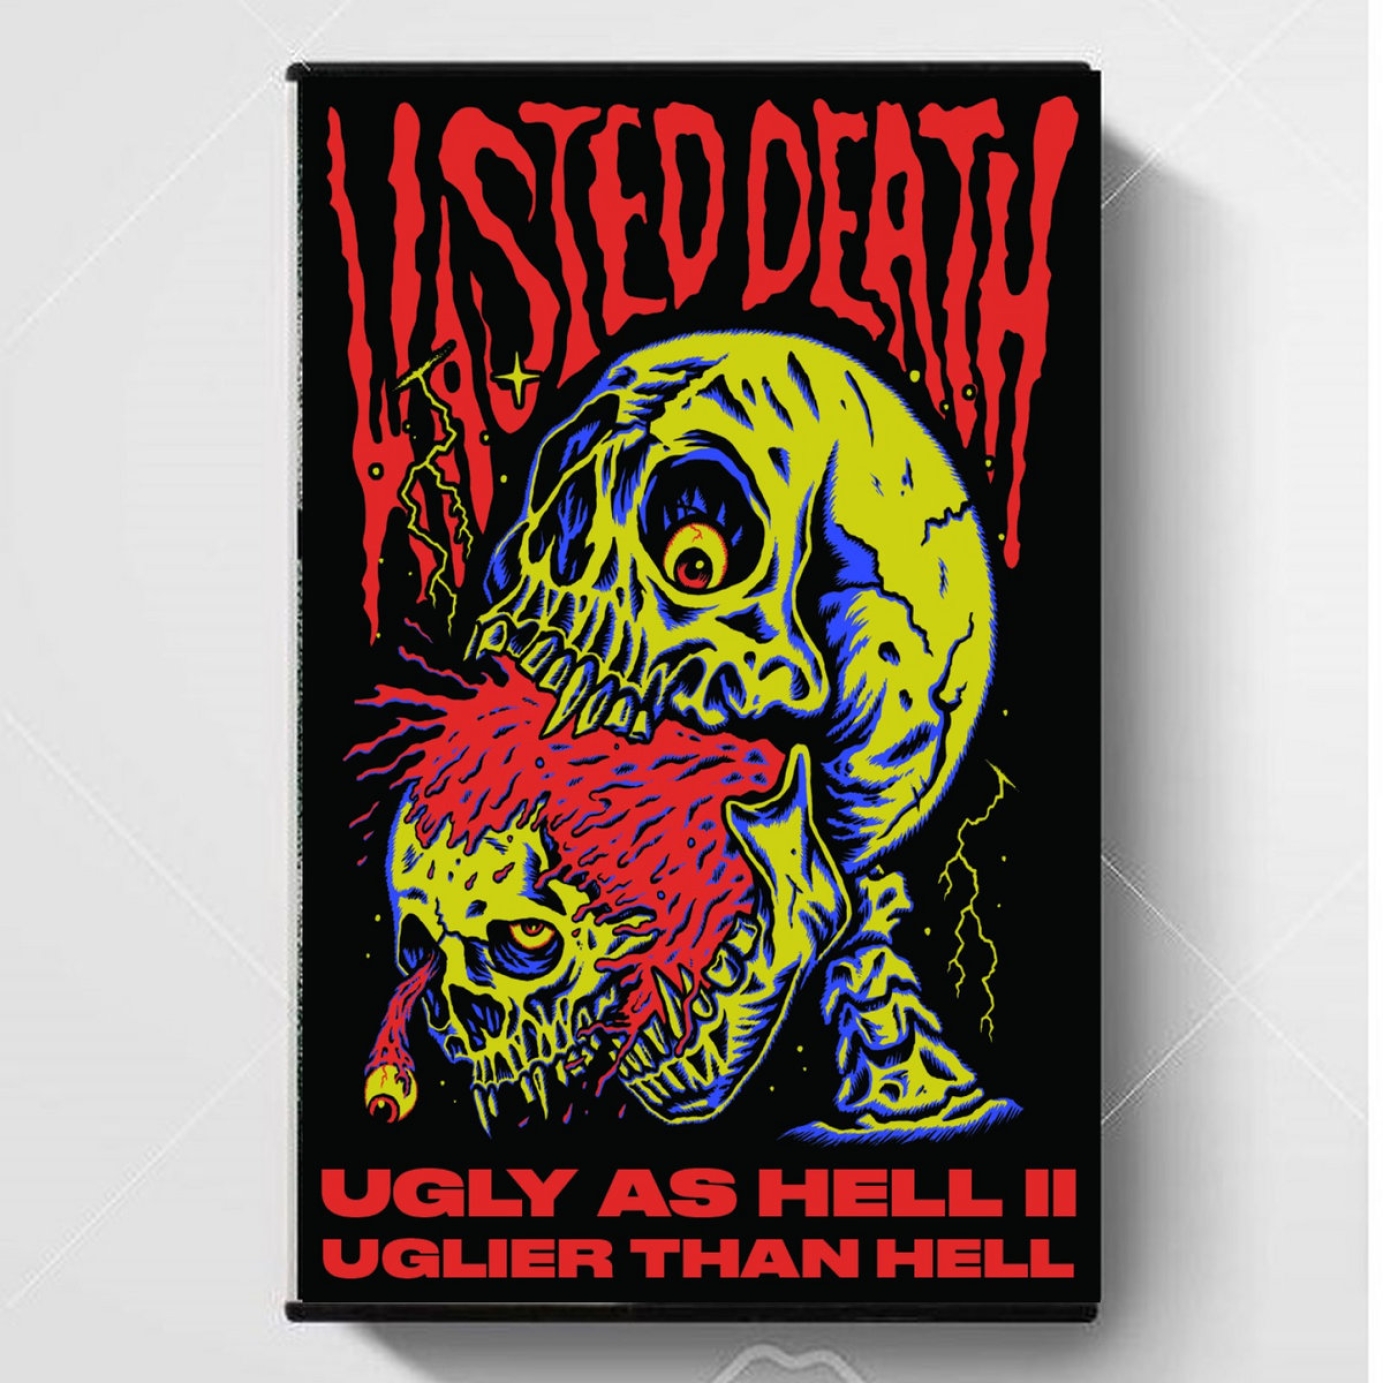 Wasted Death - Ugly As Hell 2: UGLIER THAN HELL